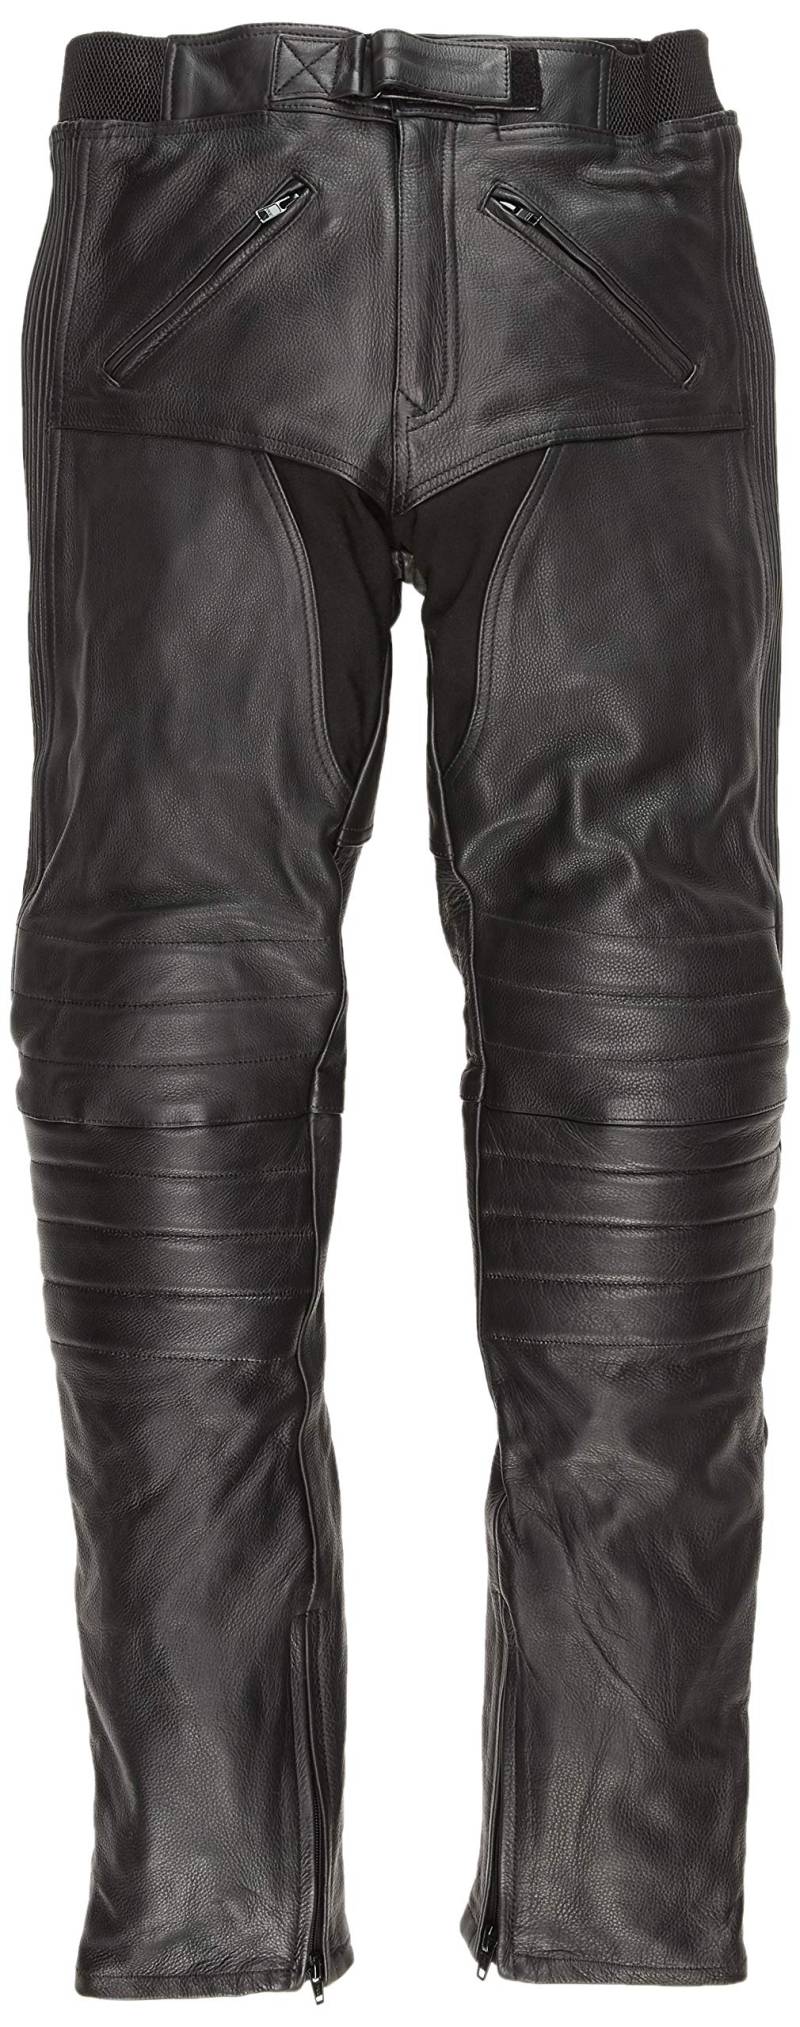 LT1005 Razor Sport Leather Trousers Removable CE Armoured Leather Pants (2XL/S) von Bikers Gear